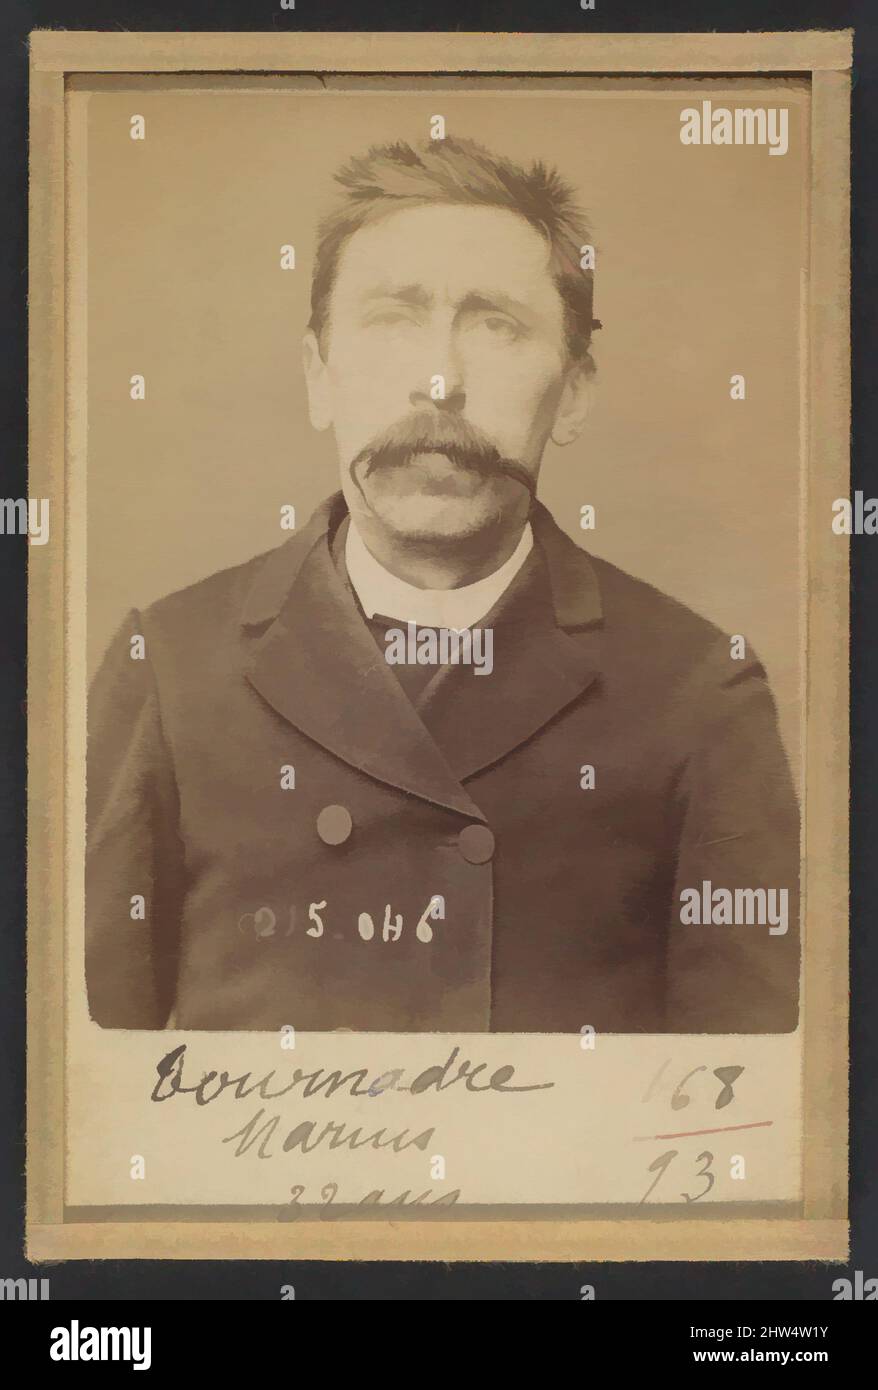 Art inspired by Tournadre. Jacques (ou Eugène). 32 ans, né à Marchal (Cantal). Journaliste. Anarchiste. 3/3/94, 1894, Albumen silver print from glass negative, 10.5 x 7 x 0.5 cm (4 1/8 x 2 3/4 x 3/16 in.) each, Photographs, Alphonse Bertillon (French, 1853–1914), Born into a, Classic works modernized by Artotop with a splash of modernity. Shapes, color and value, eye-catching visual impact on art. Emotions through freedom of artworks in a contemporary way. A timeless message pursuing a wildly creative new direction. Artists turning to the digital medium and creating the Artotop NFT Stock Photo